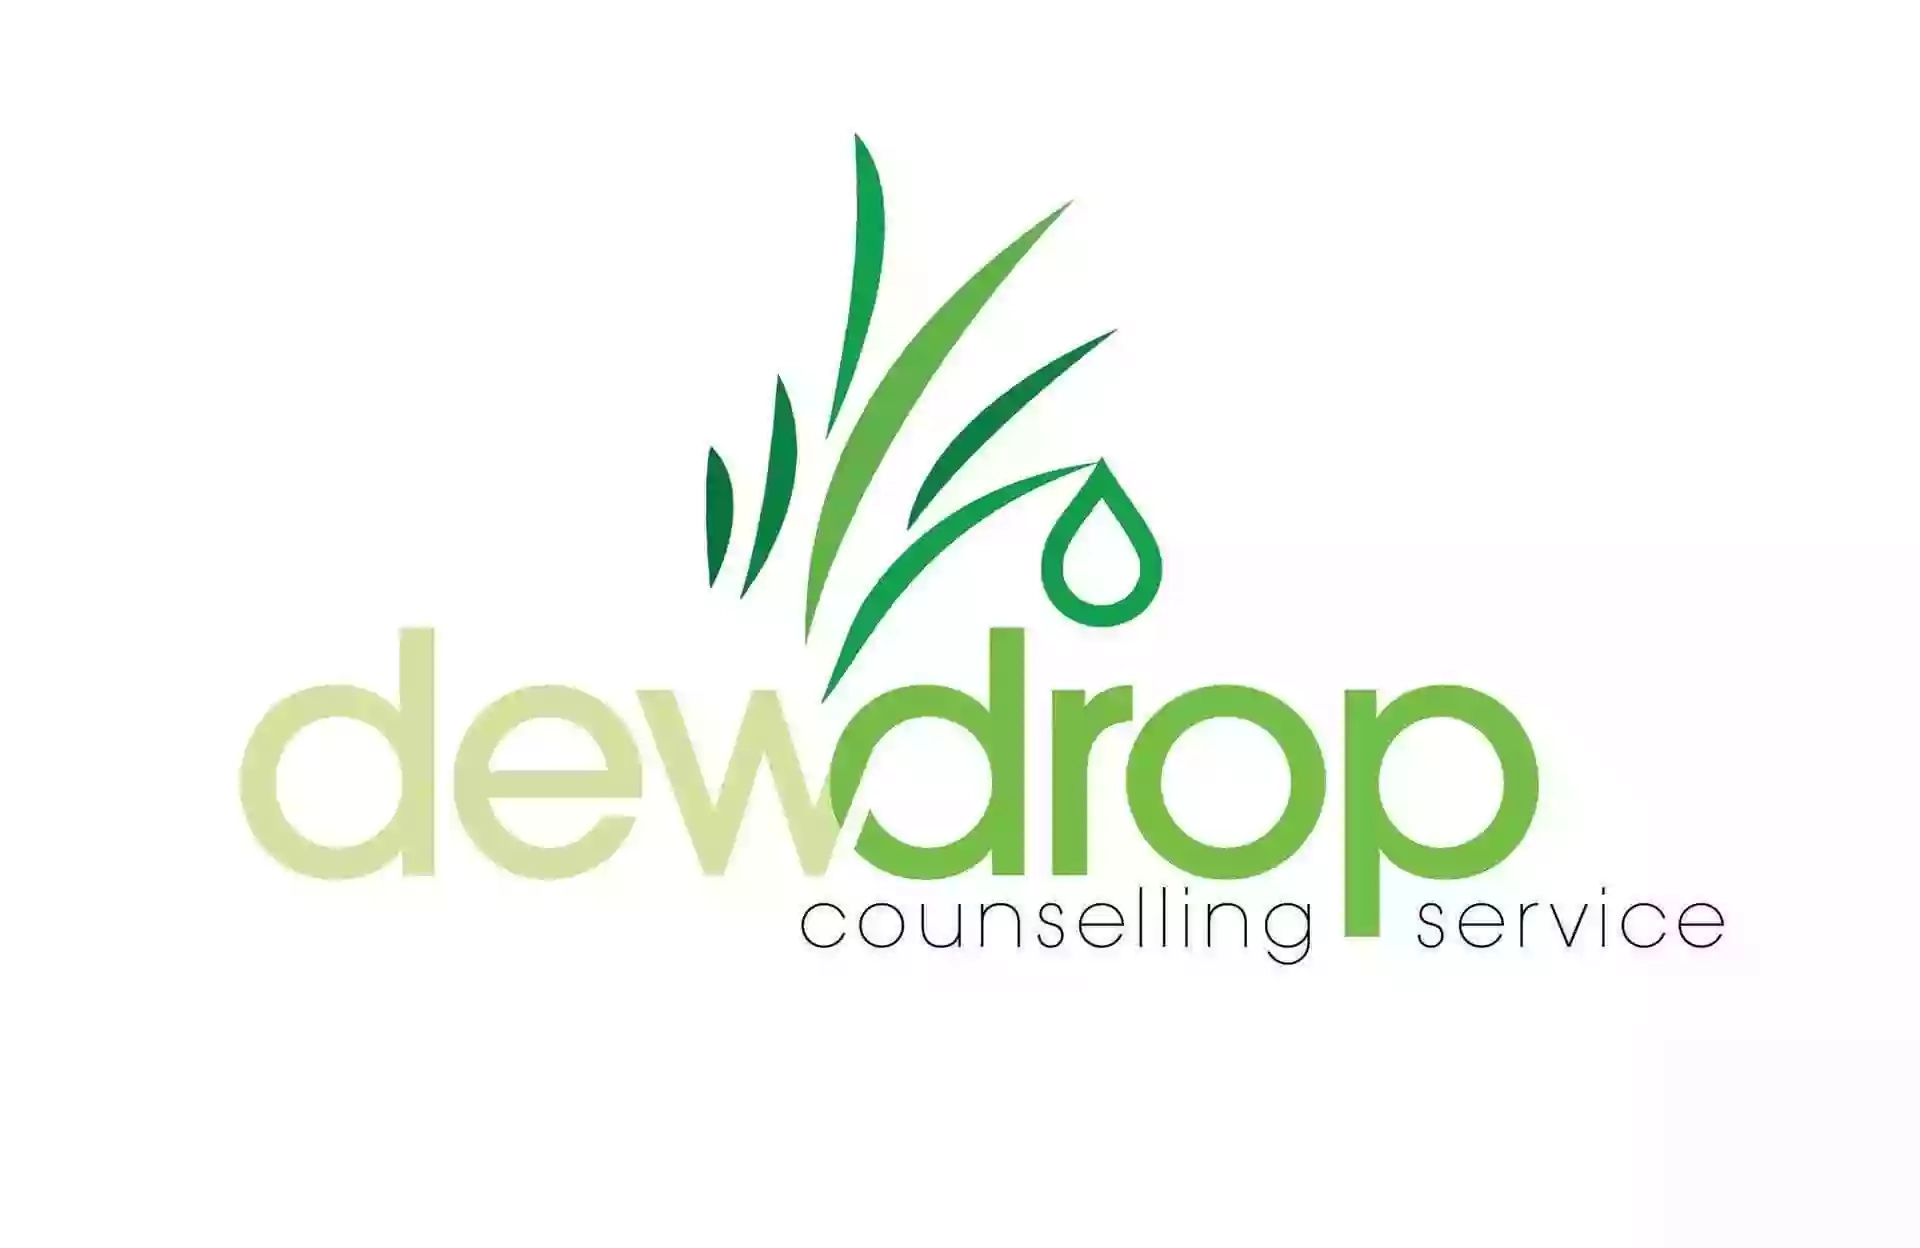 Dewdrop Counselling Service For Children, Adolescents And Adults Stourport-on-Severn Worcestershire